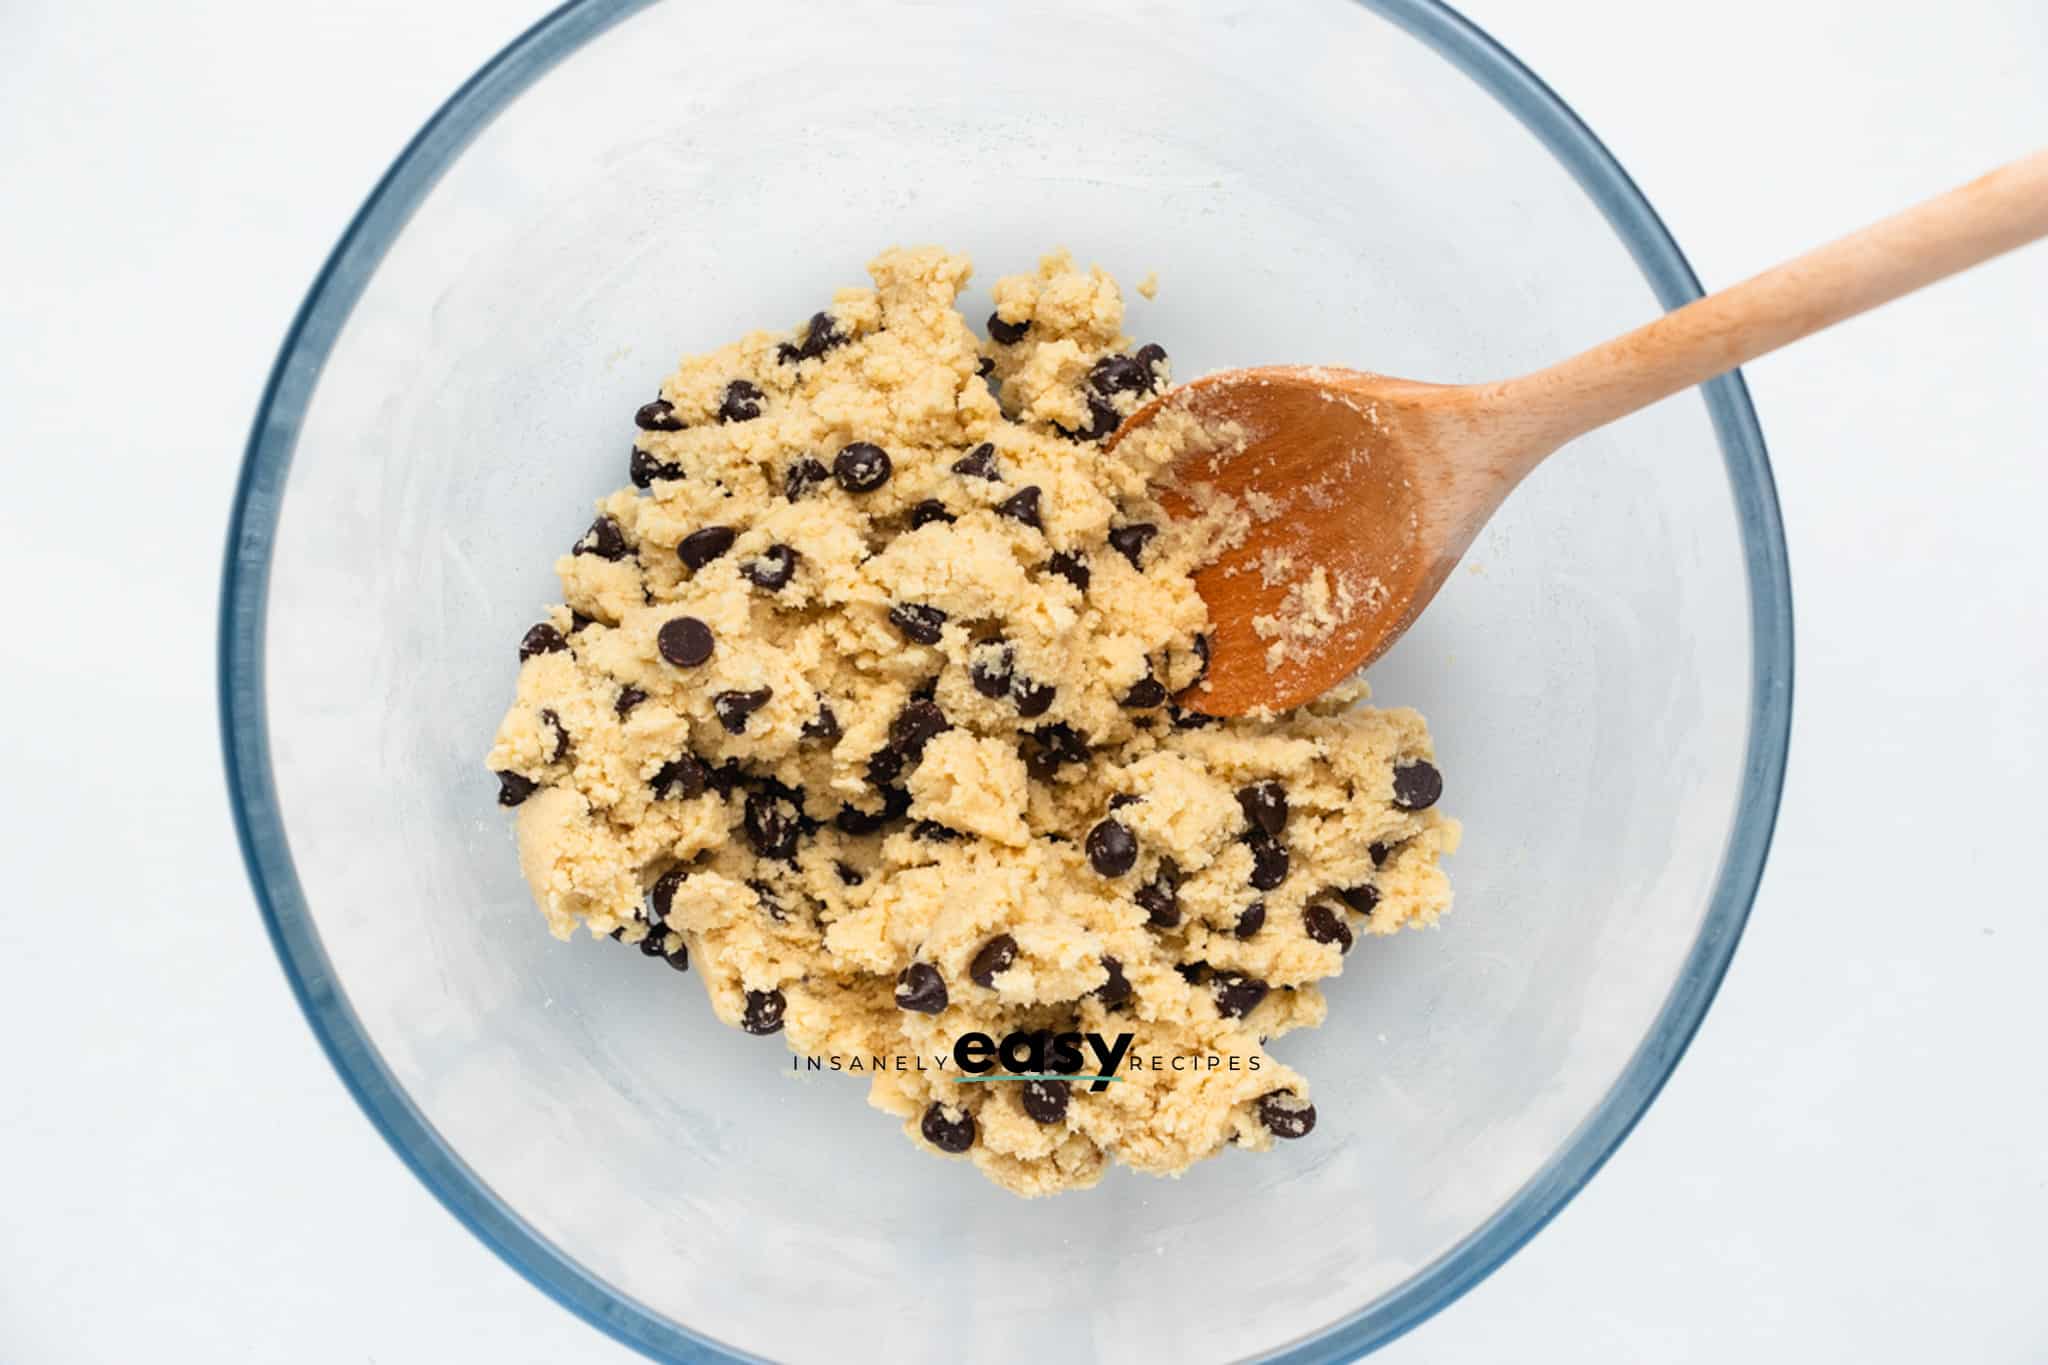 Top view photo of a glass bowl with the dough to make No Bake Cookie Dough Bites mixed together with chocolate chips.